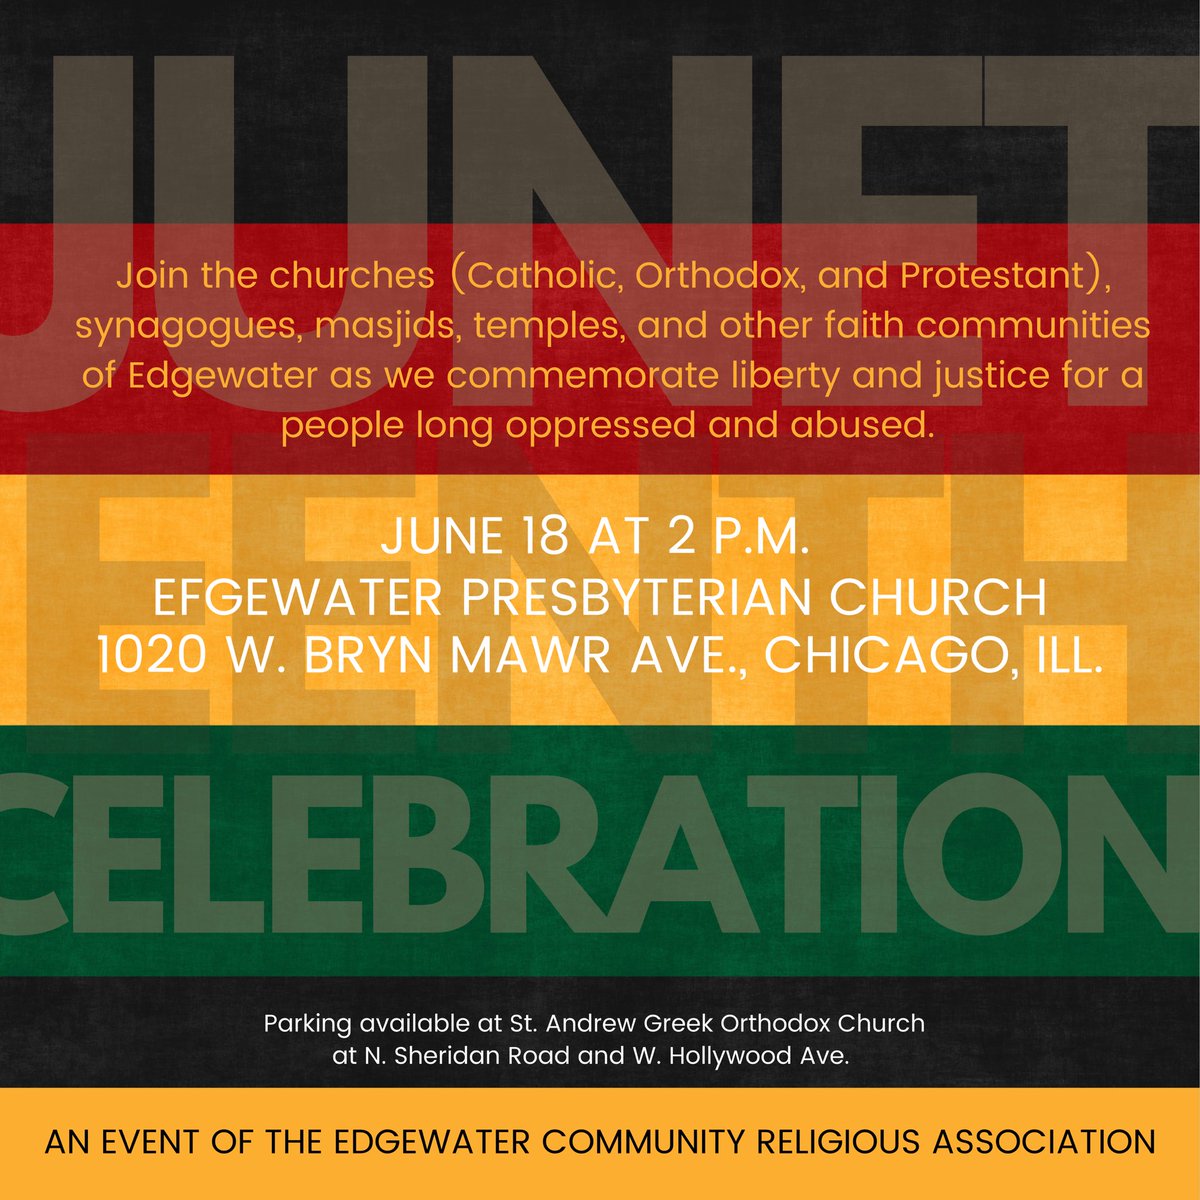 Did you know? The #UndergroundRailroad also came right through Chicago. Come celebrate liberty with us as we join other faith traditions in our sanctuary this Sunday #juneteenth #blm #pcusa @presbyterian @presbychicago